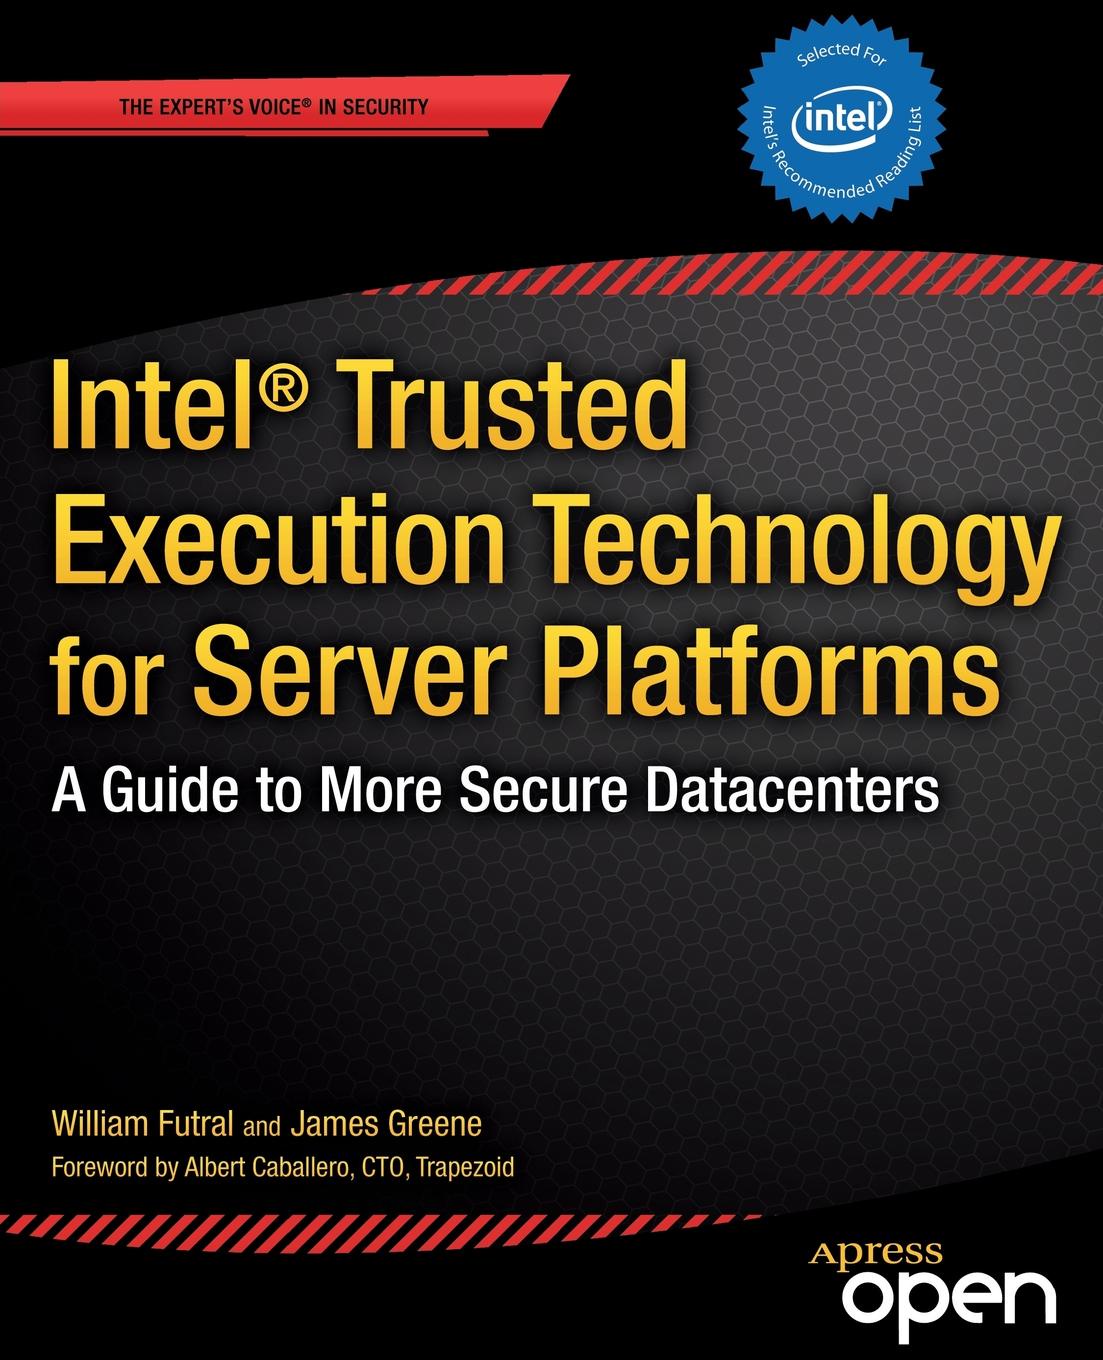 Intel(r) Trusted Execution Technology for Server Platforms. A Guide to More Secure Datacenters